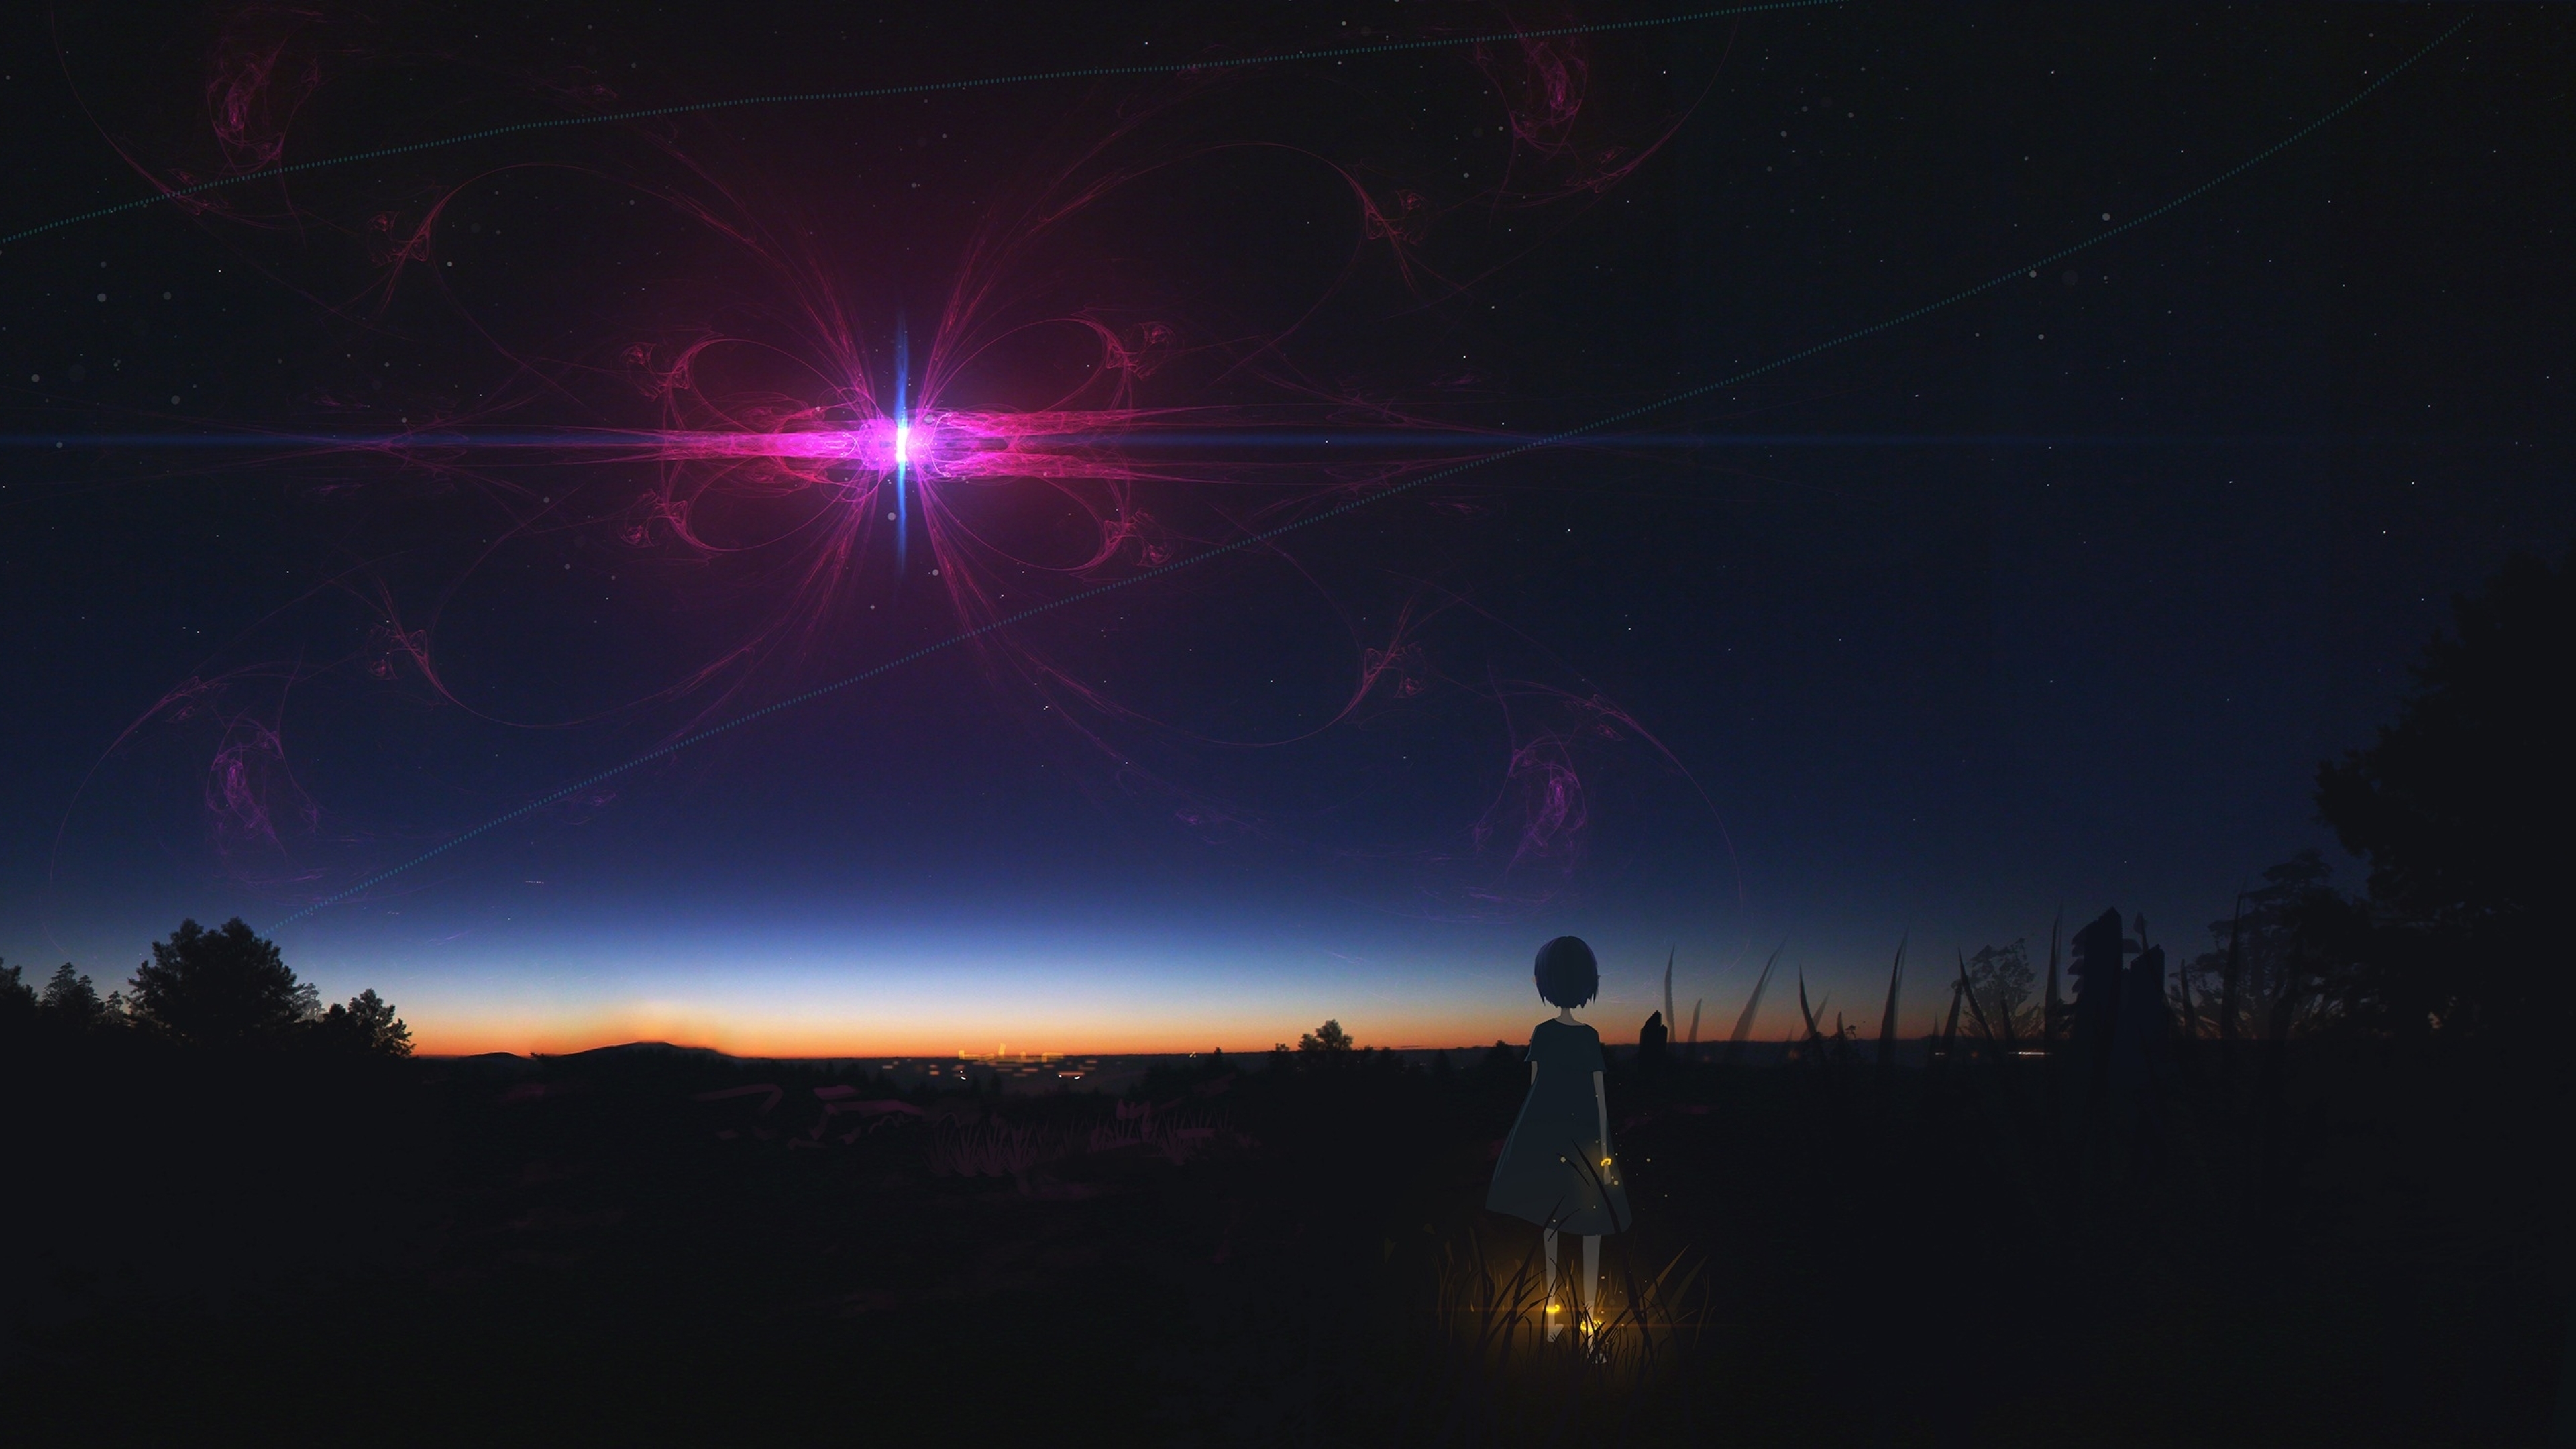 3840x2160 Anime Girl Staring At Night Sky 4k Wallpaper Hd Anime 4k Wallpapers Images Photos And Background